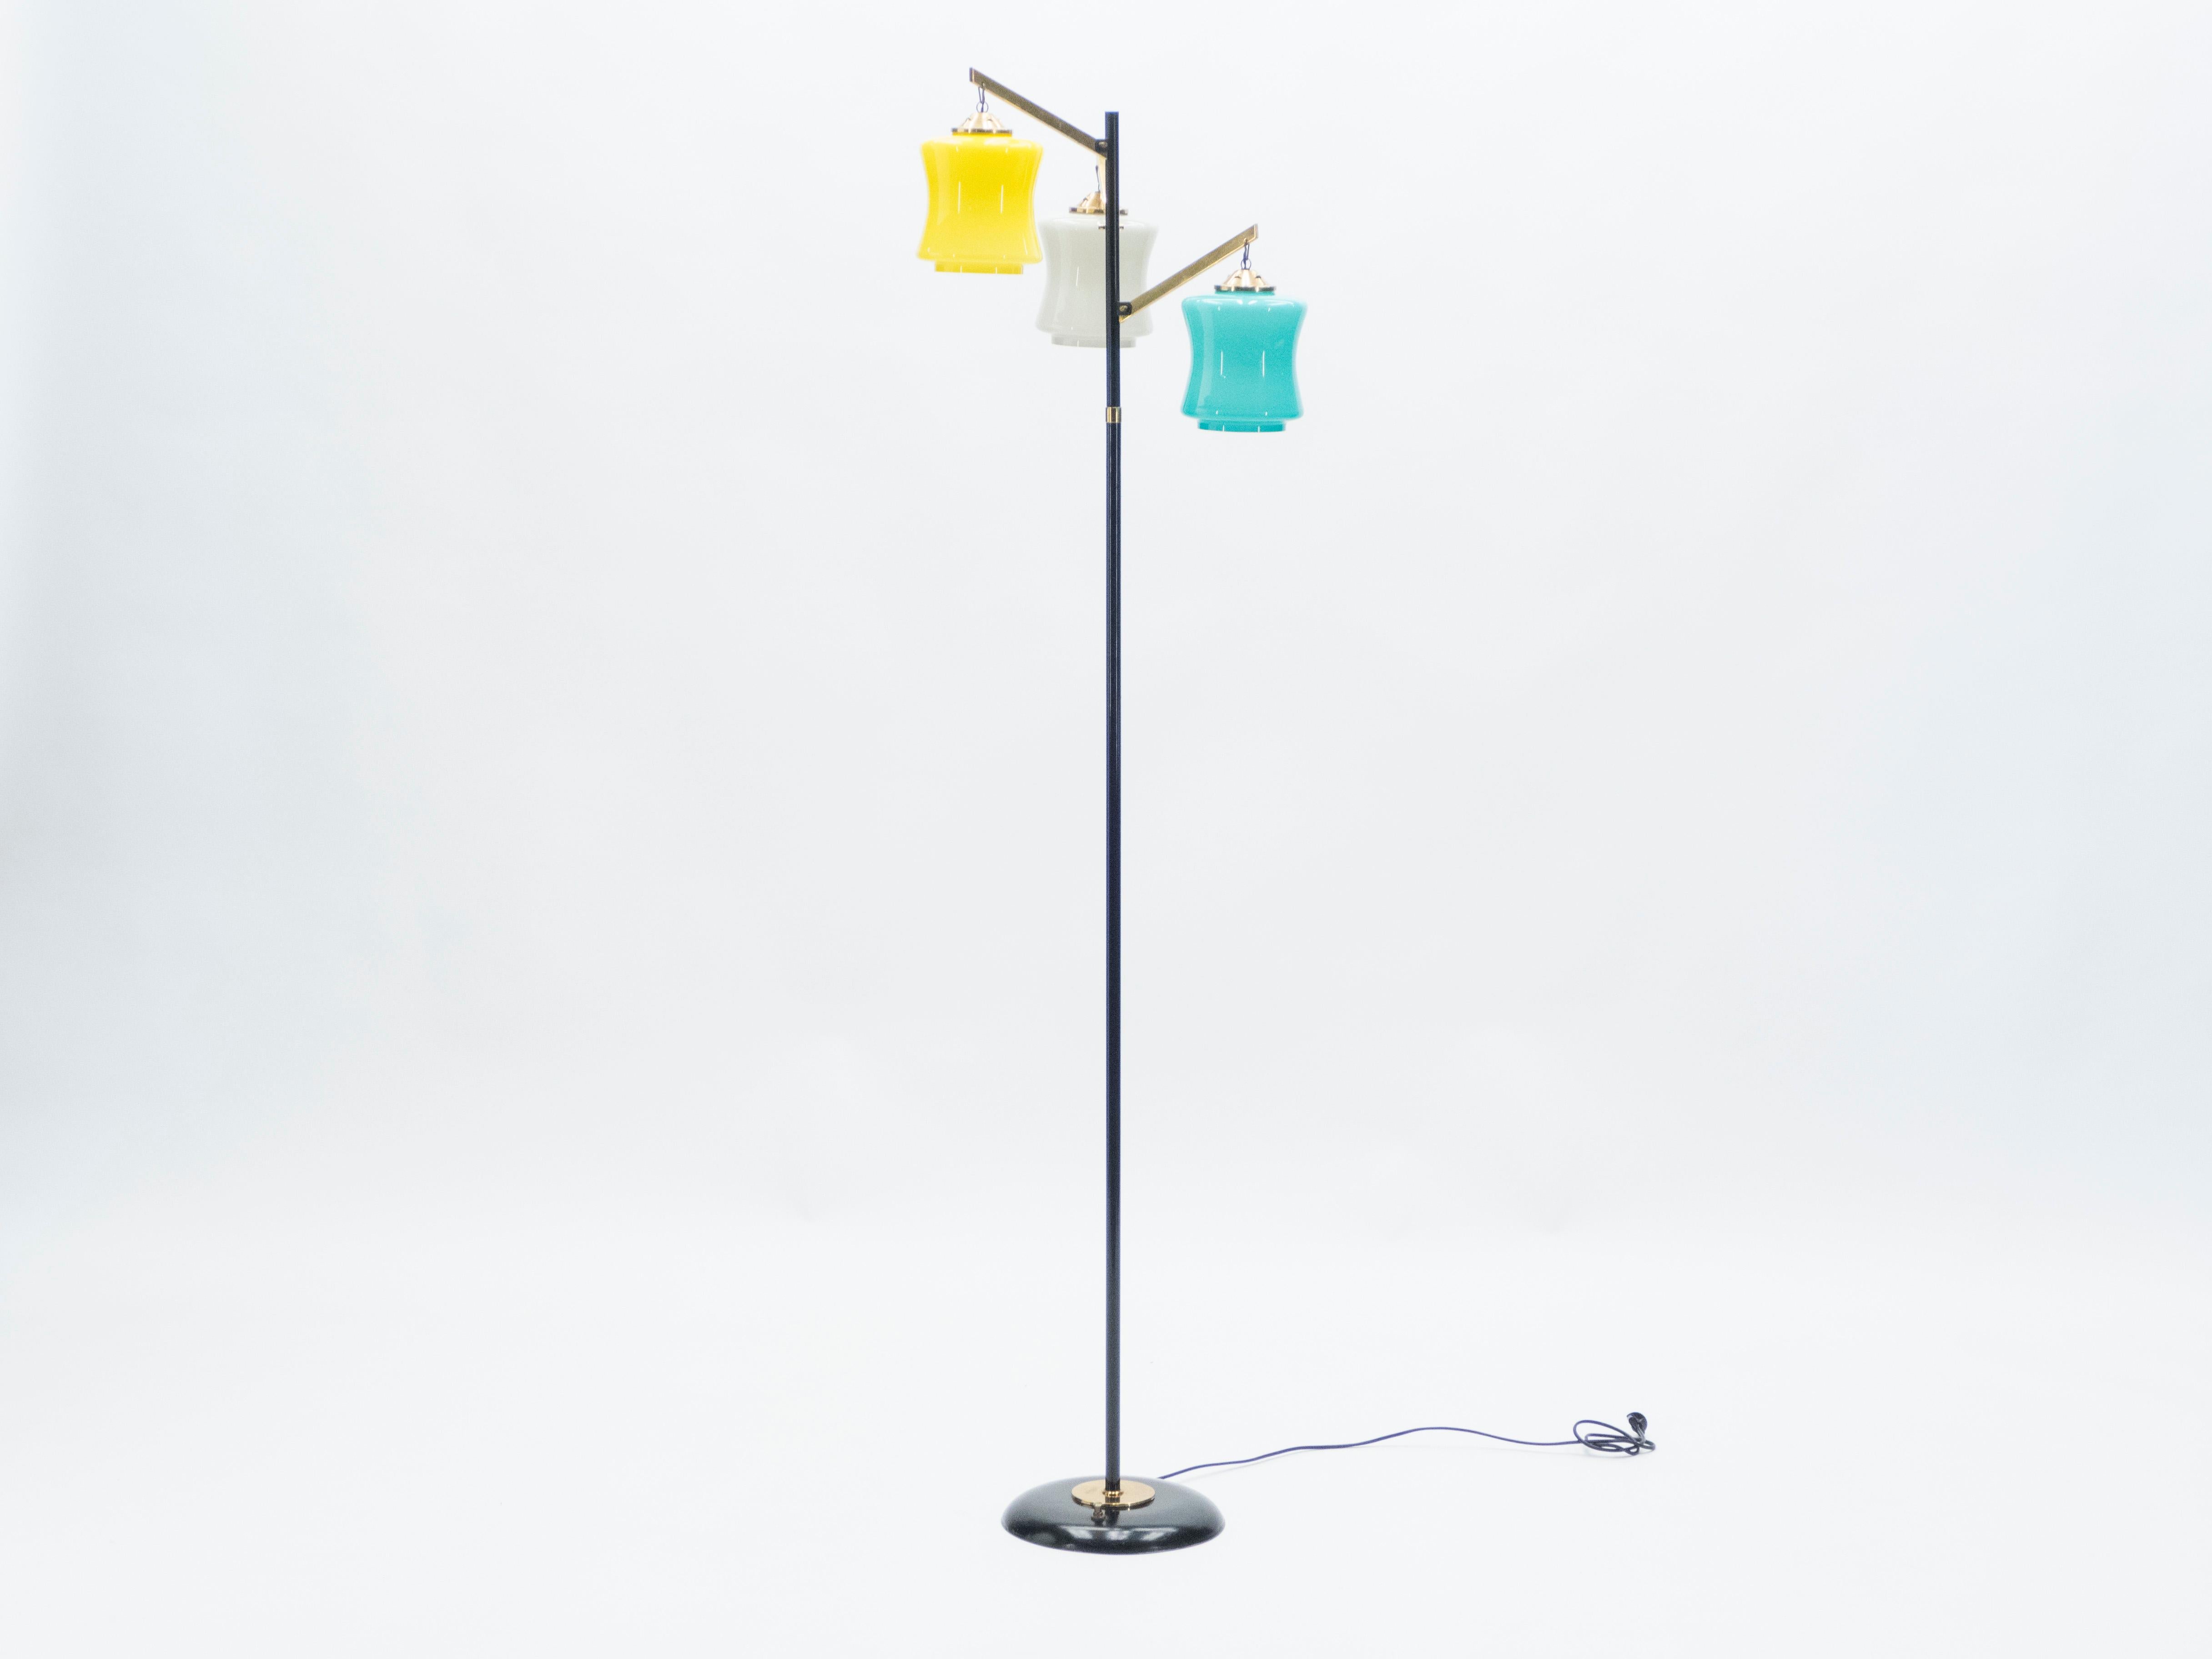 Vintage Italian floor lamp by Vistosi, with three Murano glasses in blue, yellow, and white exterior, mounted on painted black metal legs with brass details and handles produced in the 1950s in Italy. An instantly charming floor lamp, with a chic